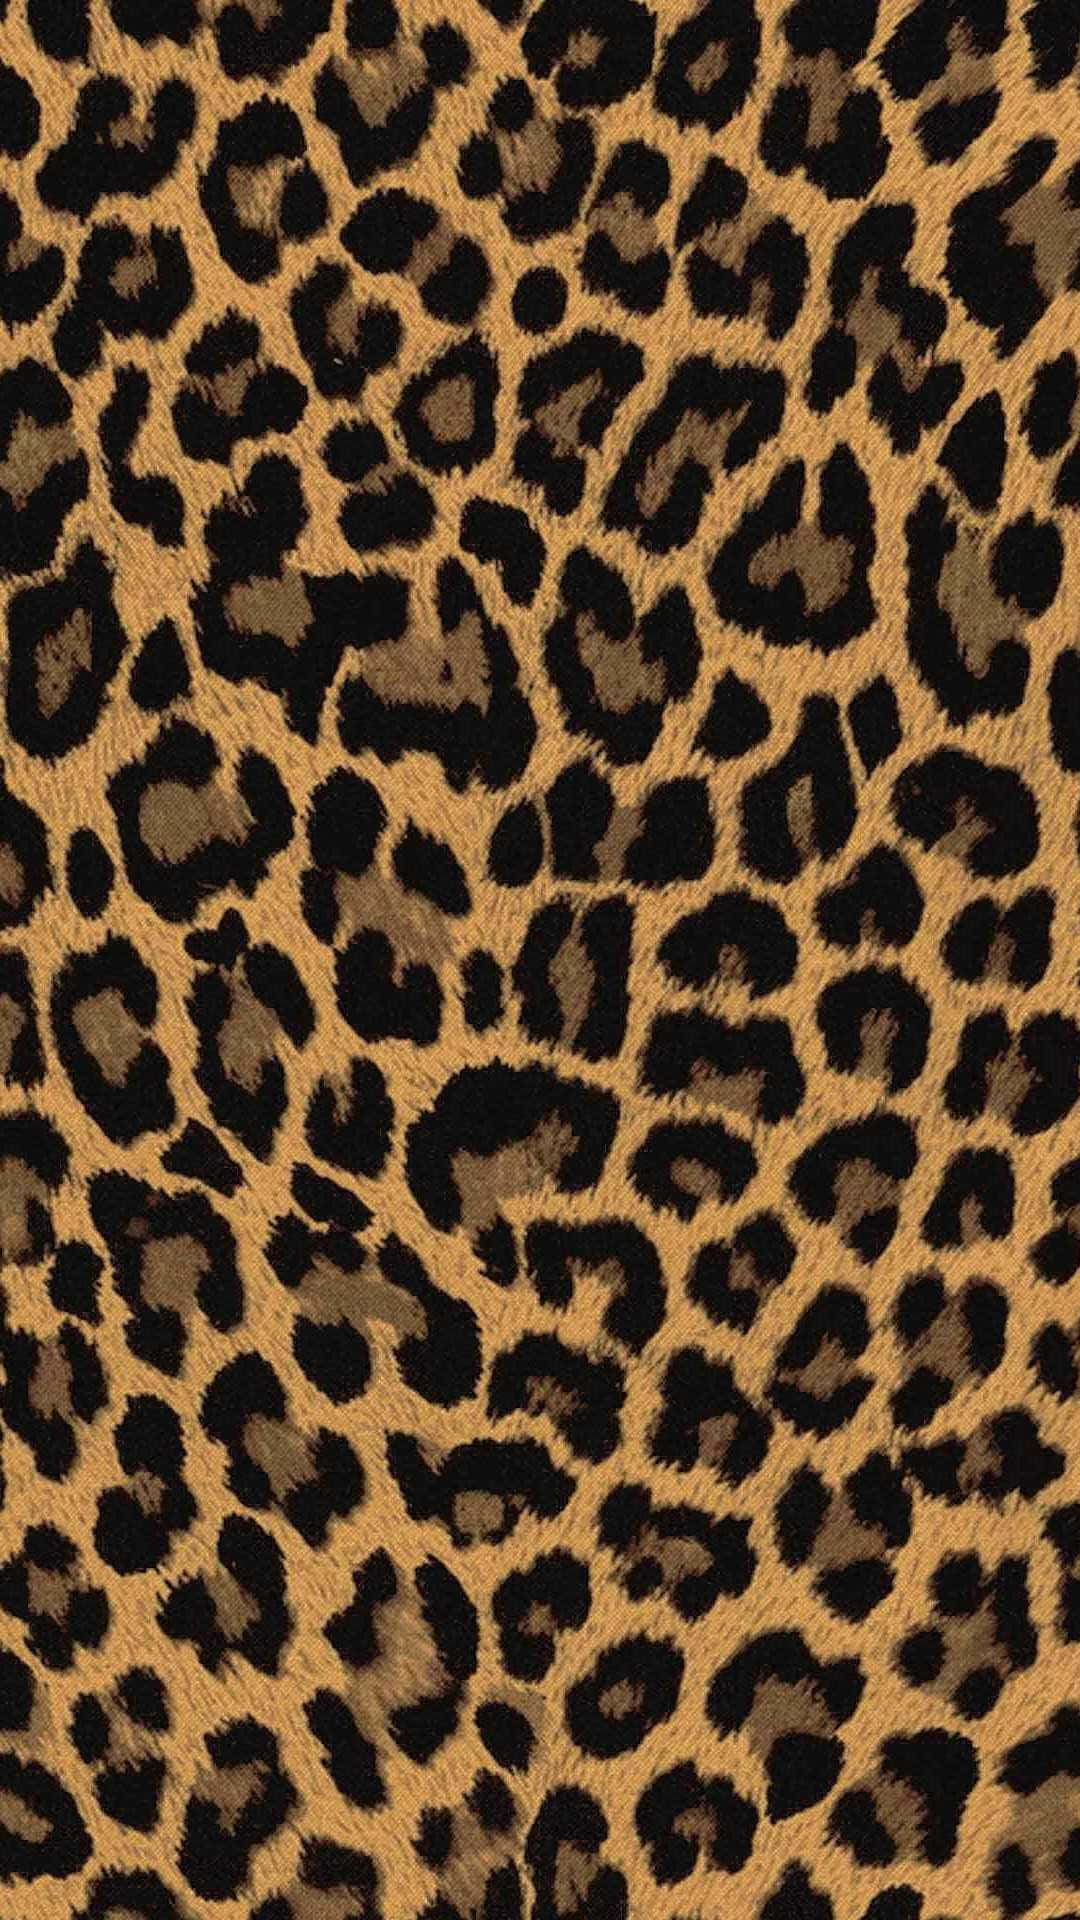 Upgrade to Animal Print with the latest iPhone Wallpaper